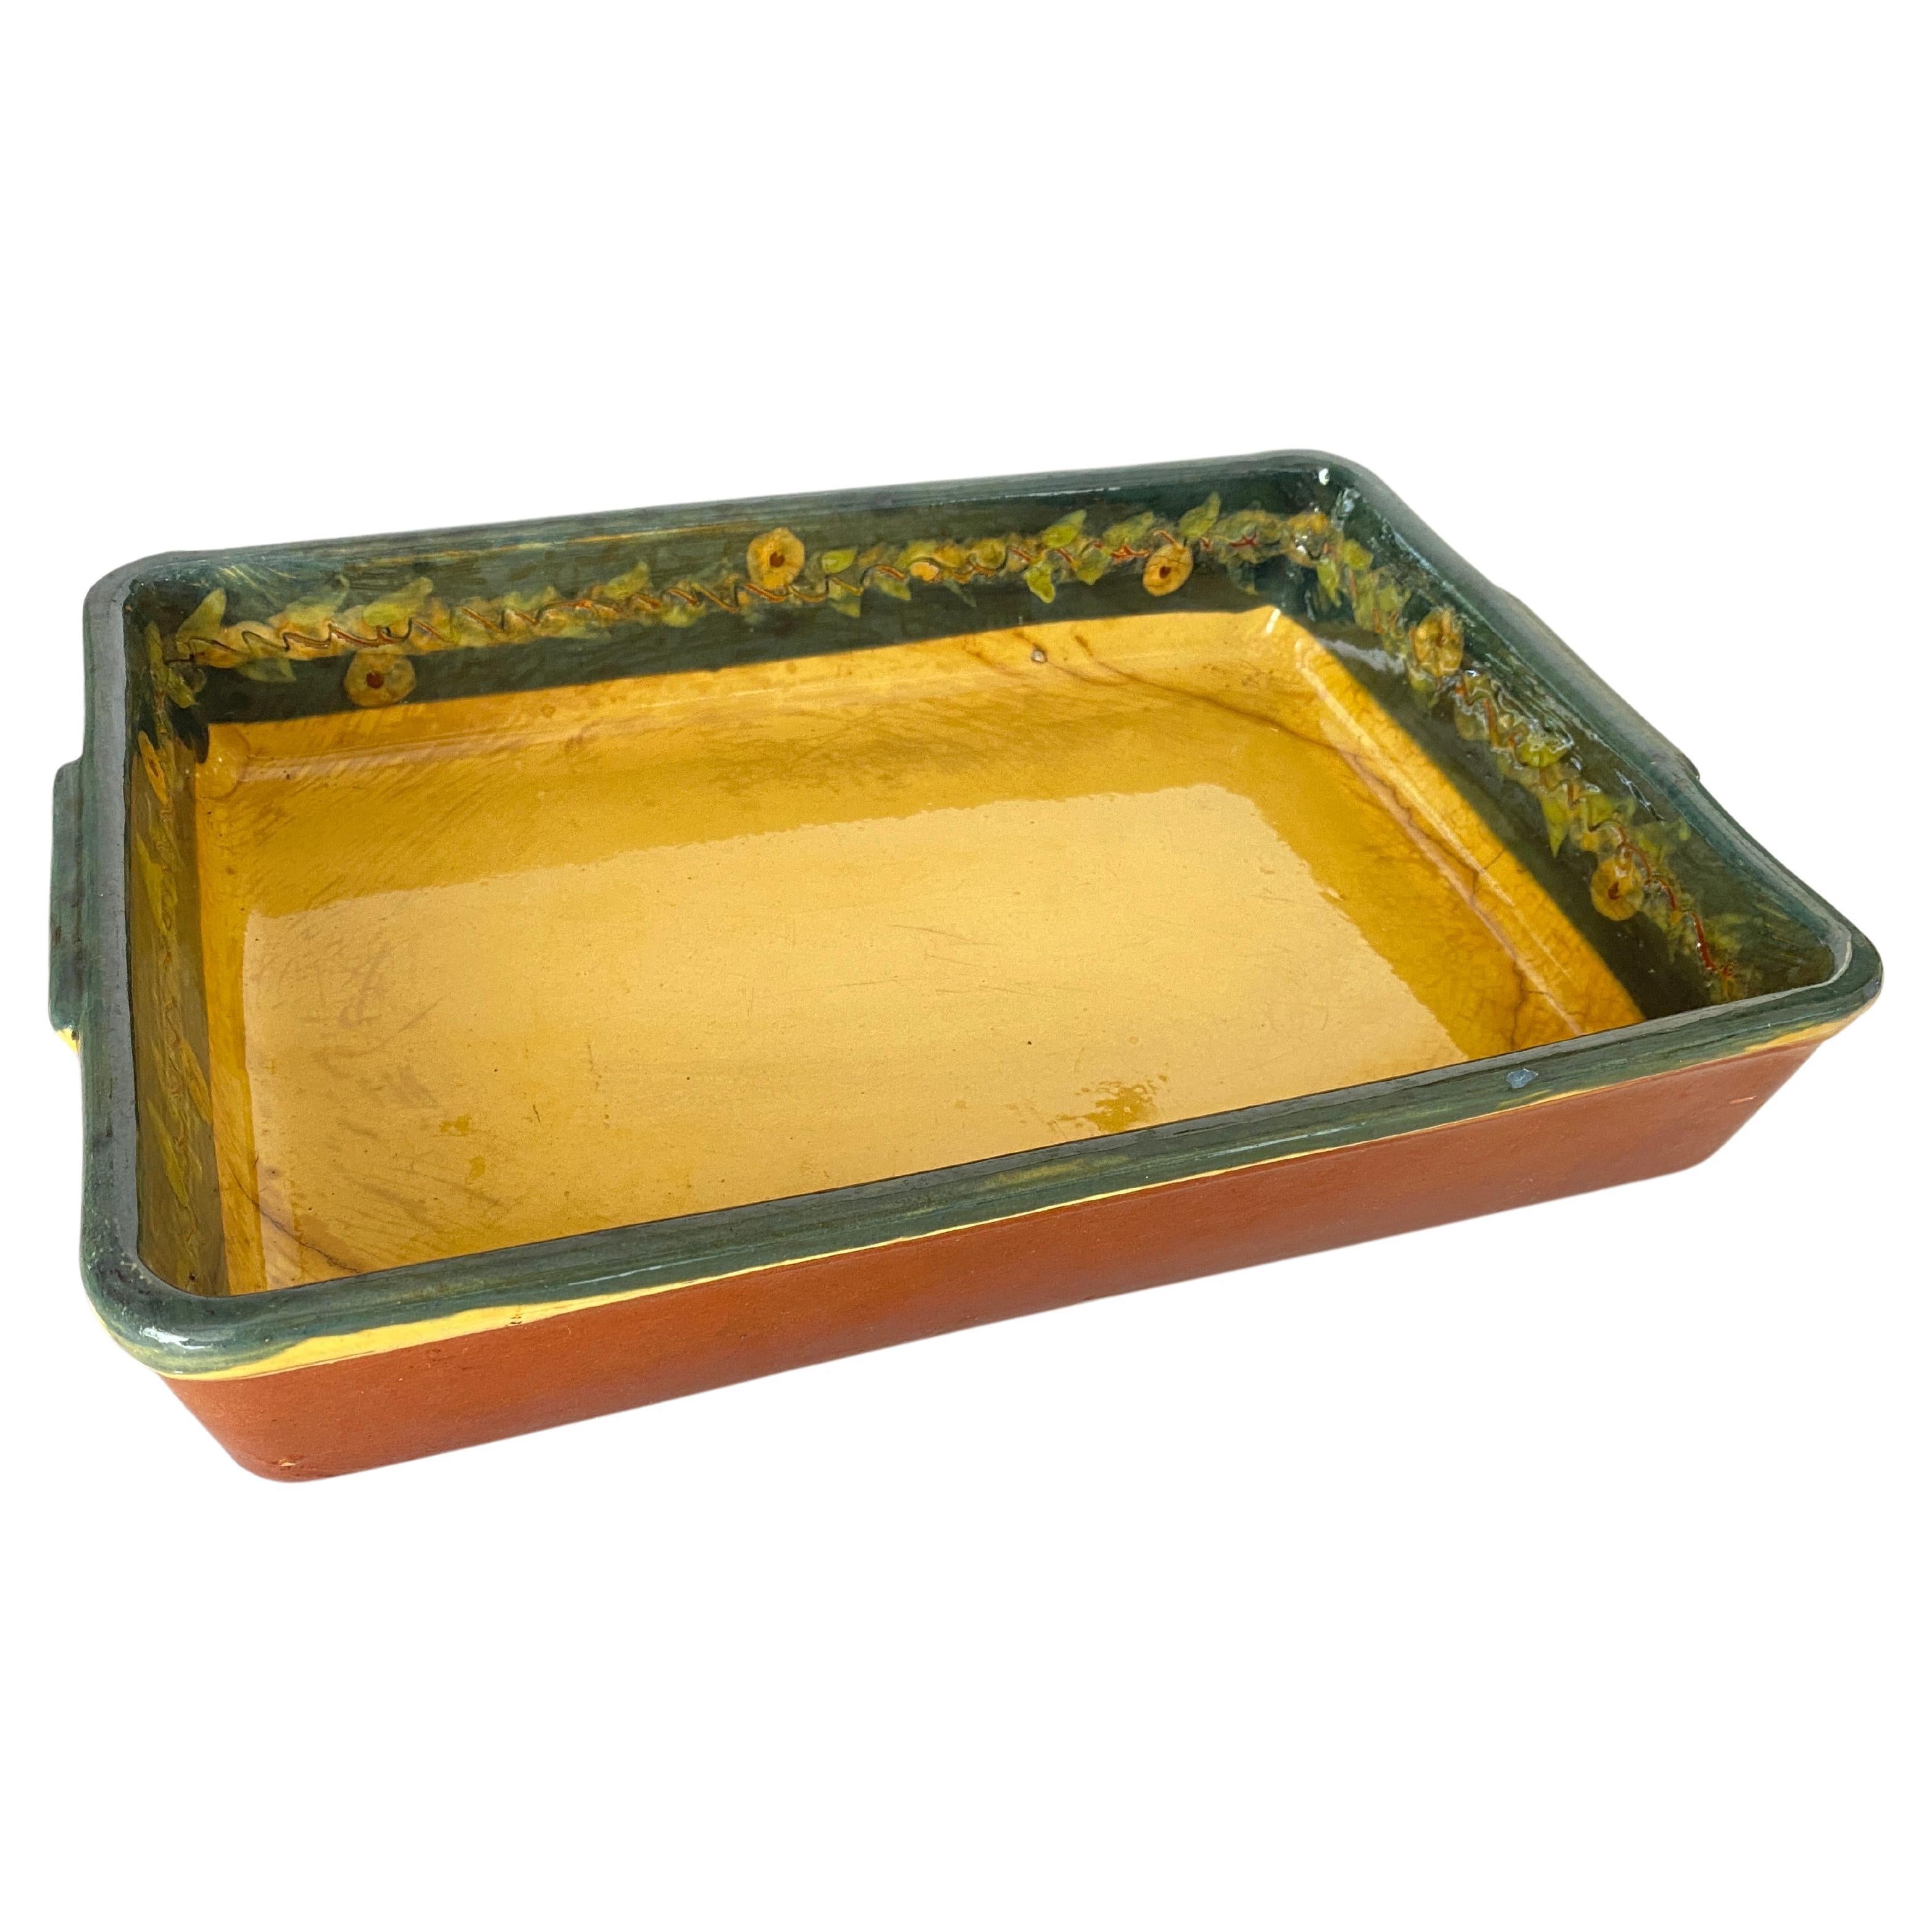 Earthenware oven dish Decorative Dish With flowers decoration Yellow Color 